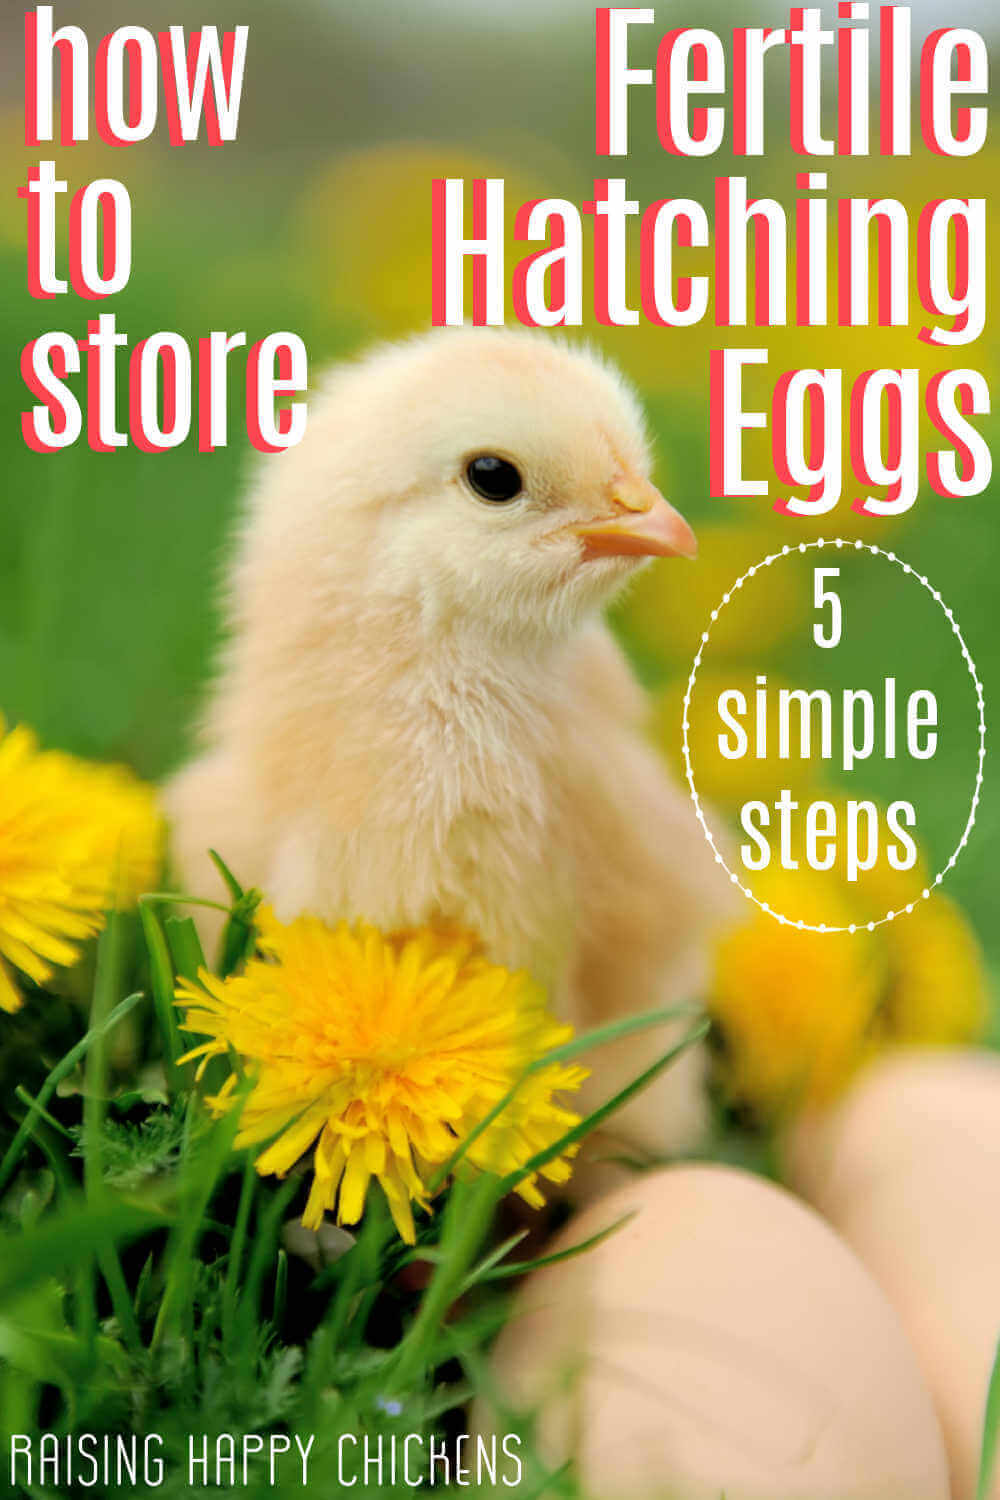 5 Tips for Clean Eggs from your Backyard Chickens - Fresh Eggs